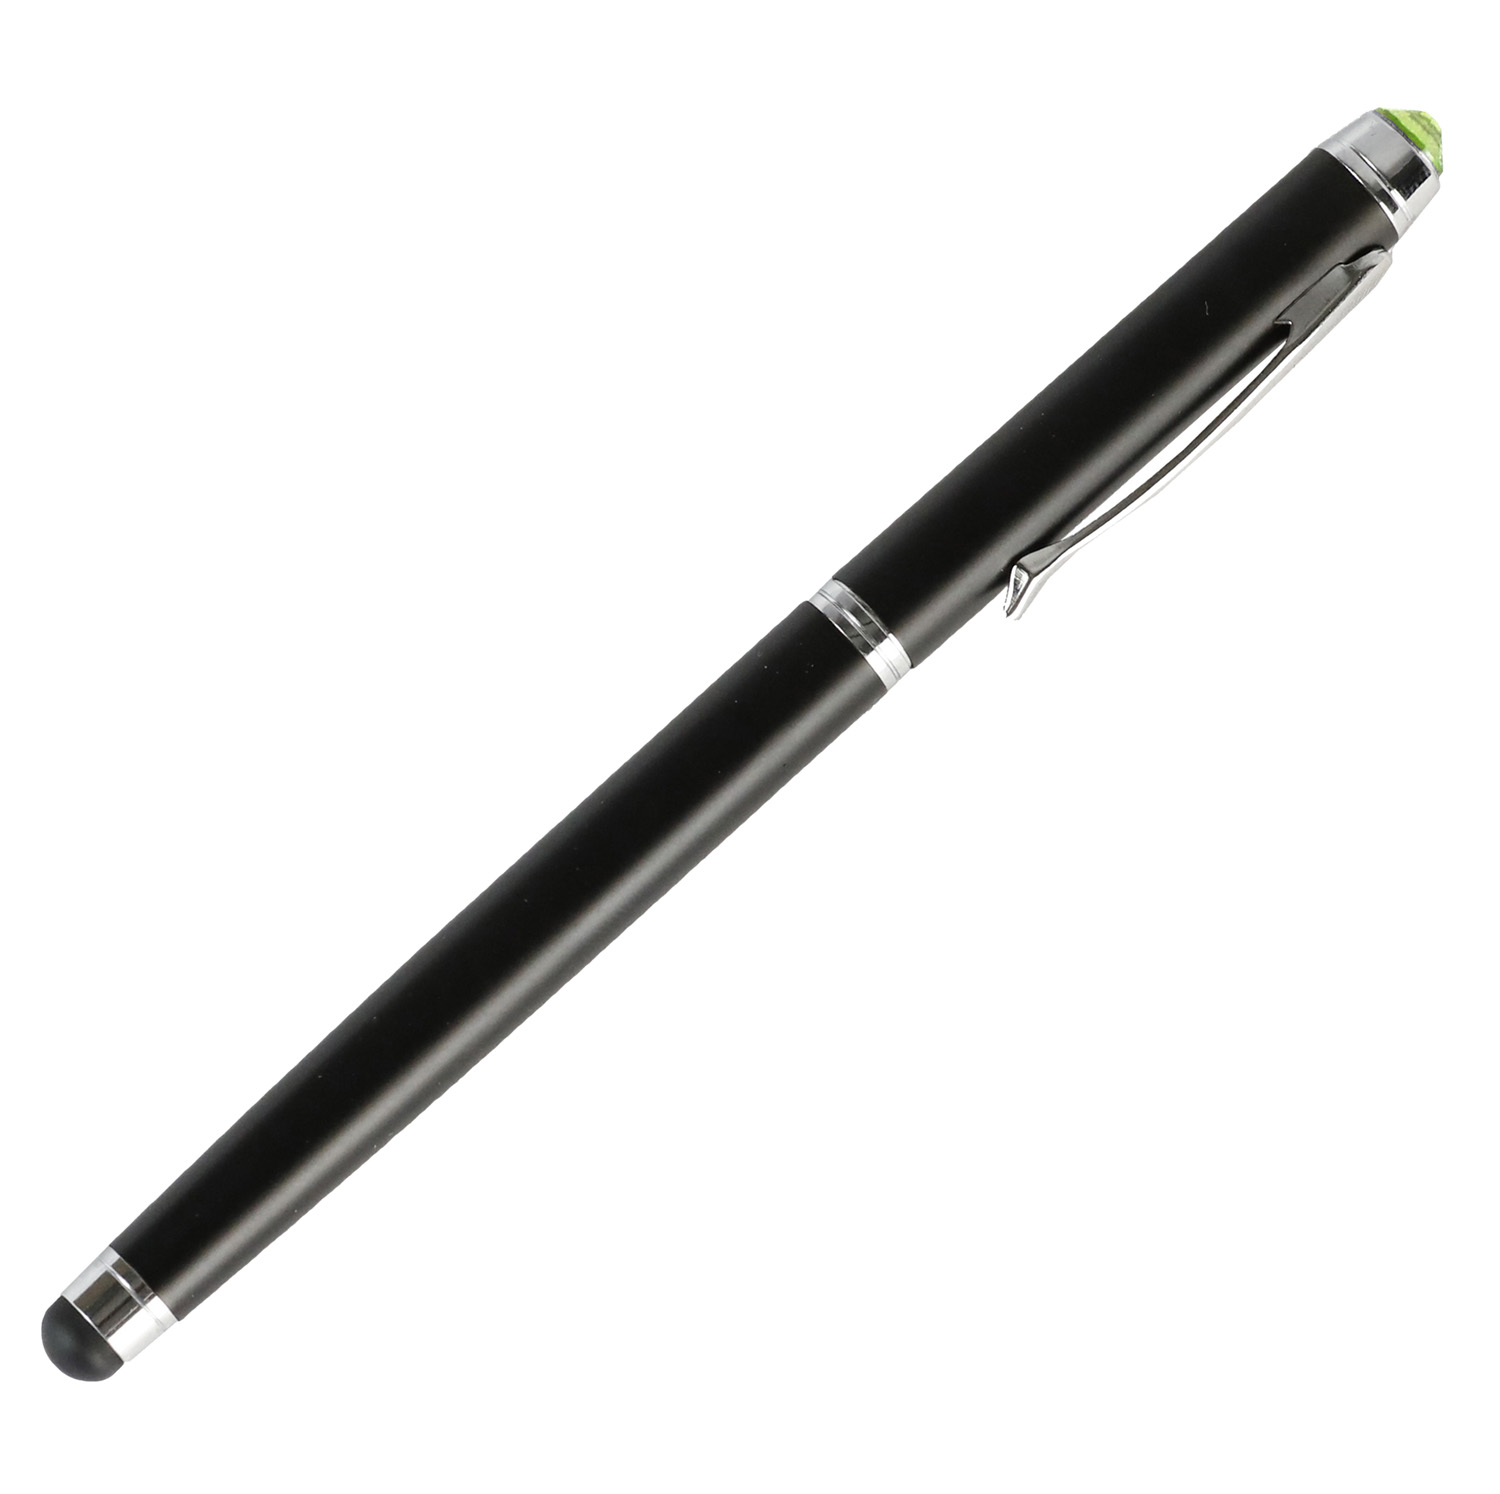 Universal Stylus Pen - Touch Screen with Gem for Iphone Ipad Tablet Smartphones - Peridot